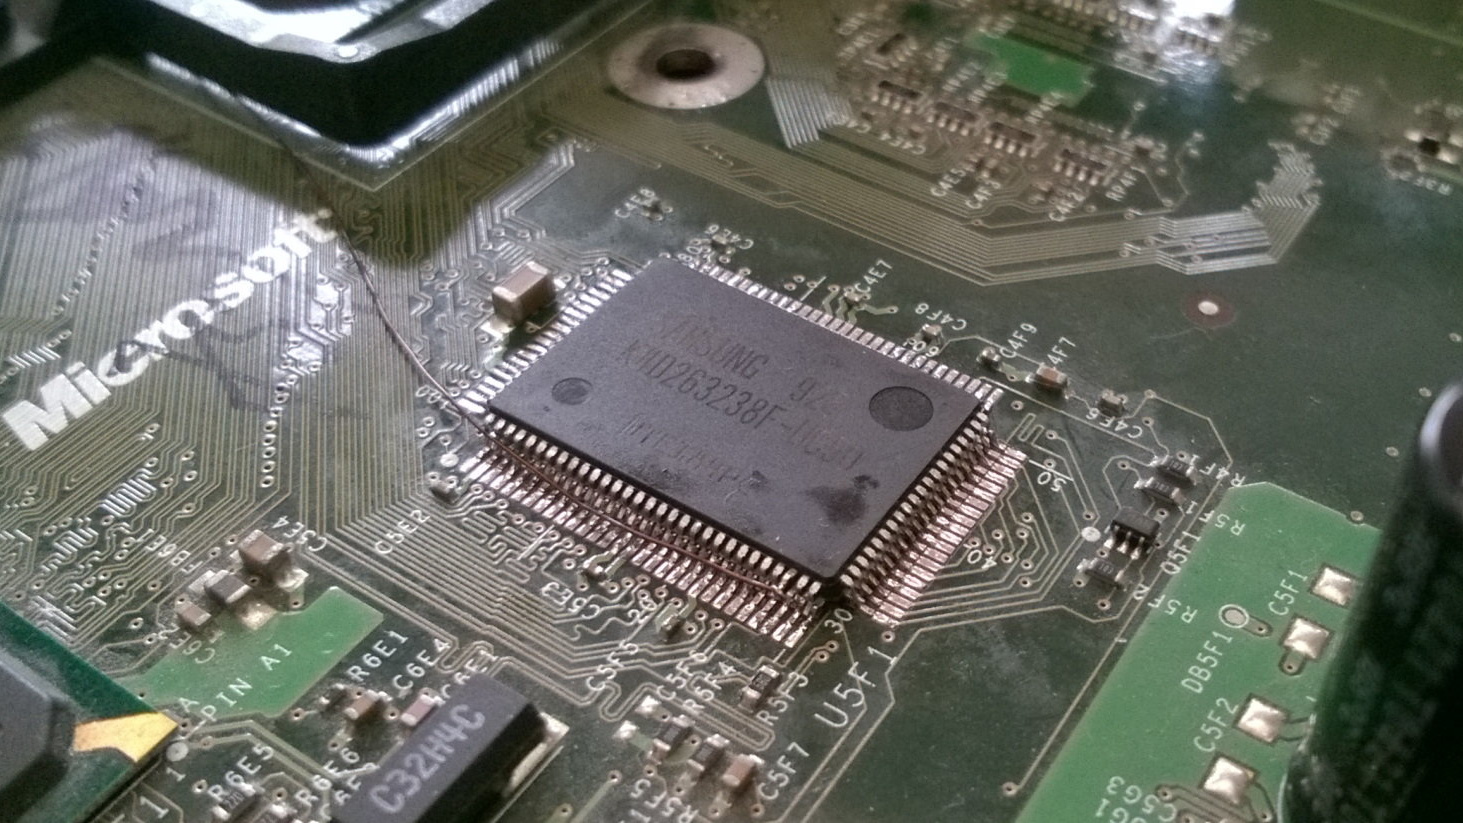 Picture of the modification as it's being performed, with an extra chip stacked on top of the original, extra magnet wire connection going to the chip select line pin